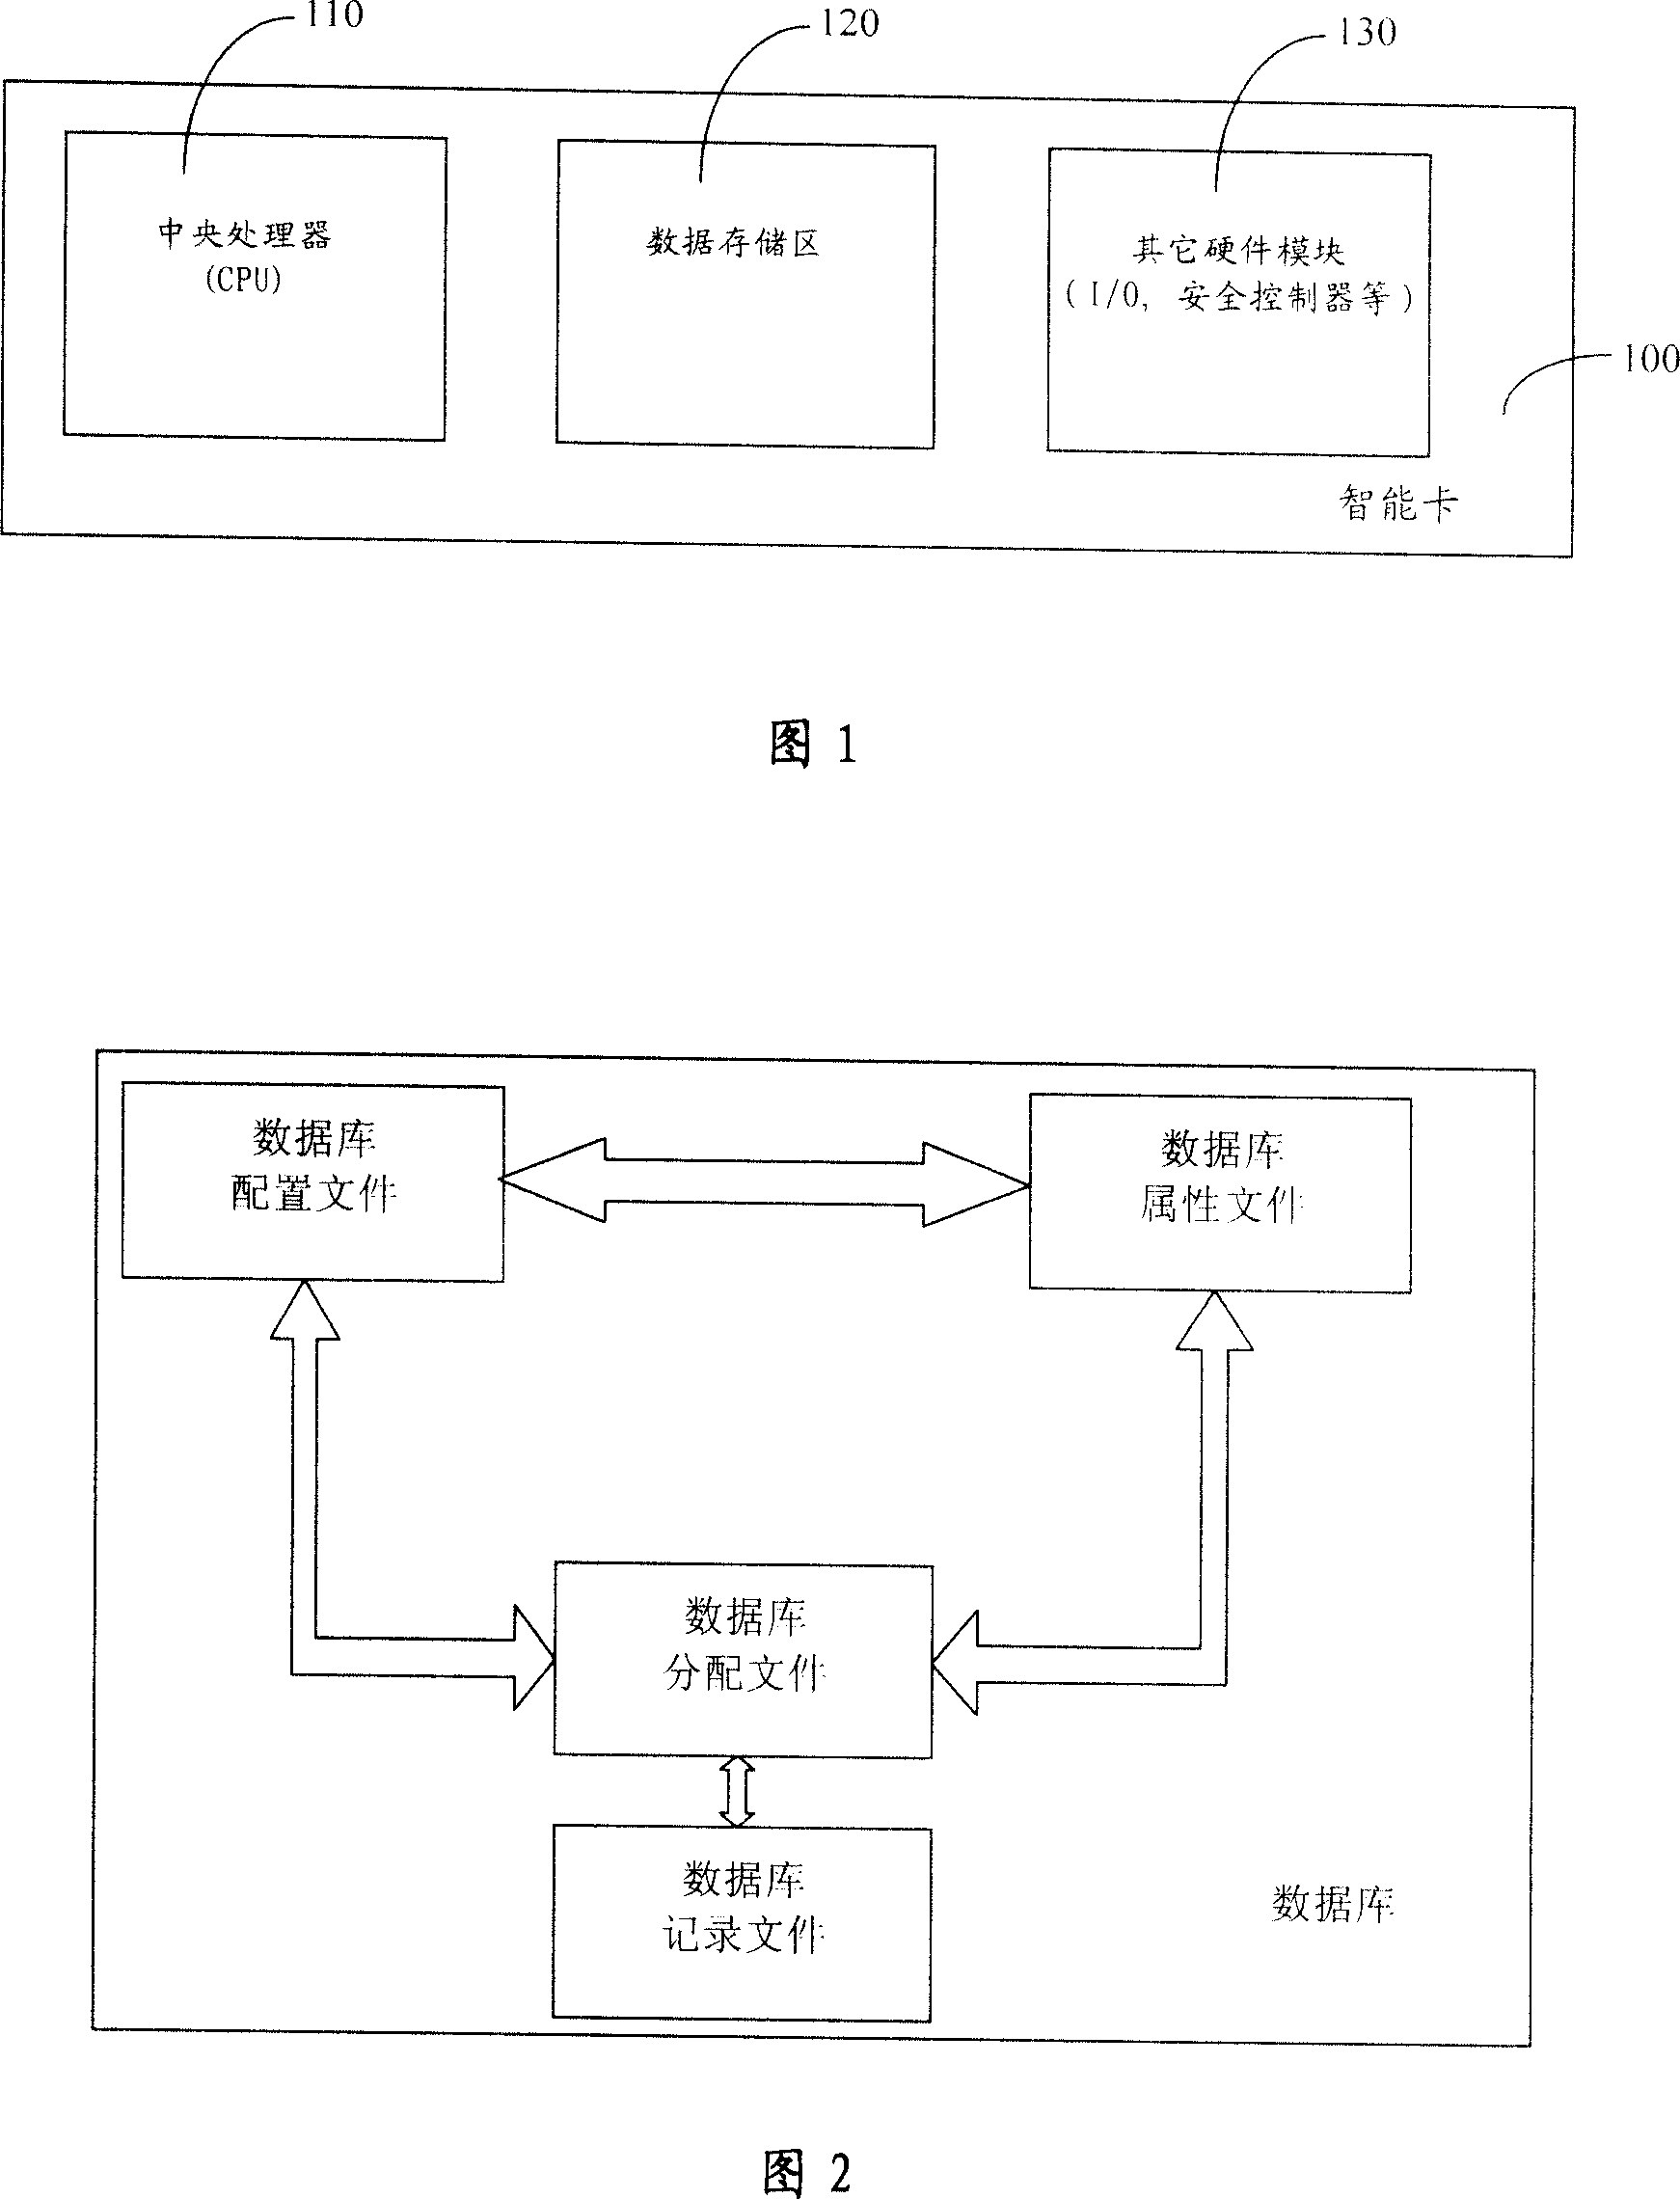 Mass storing and managing method of smart card